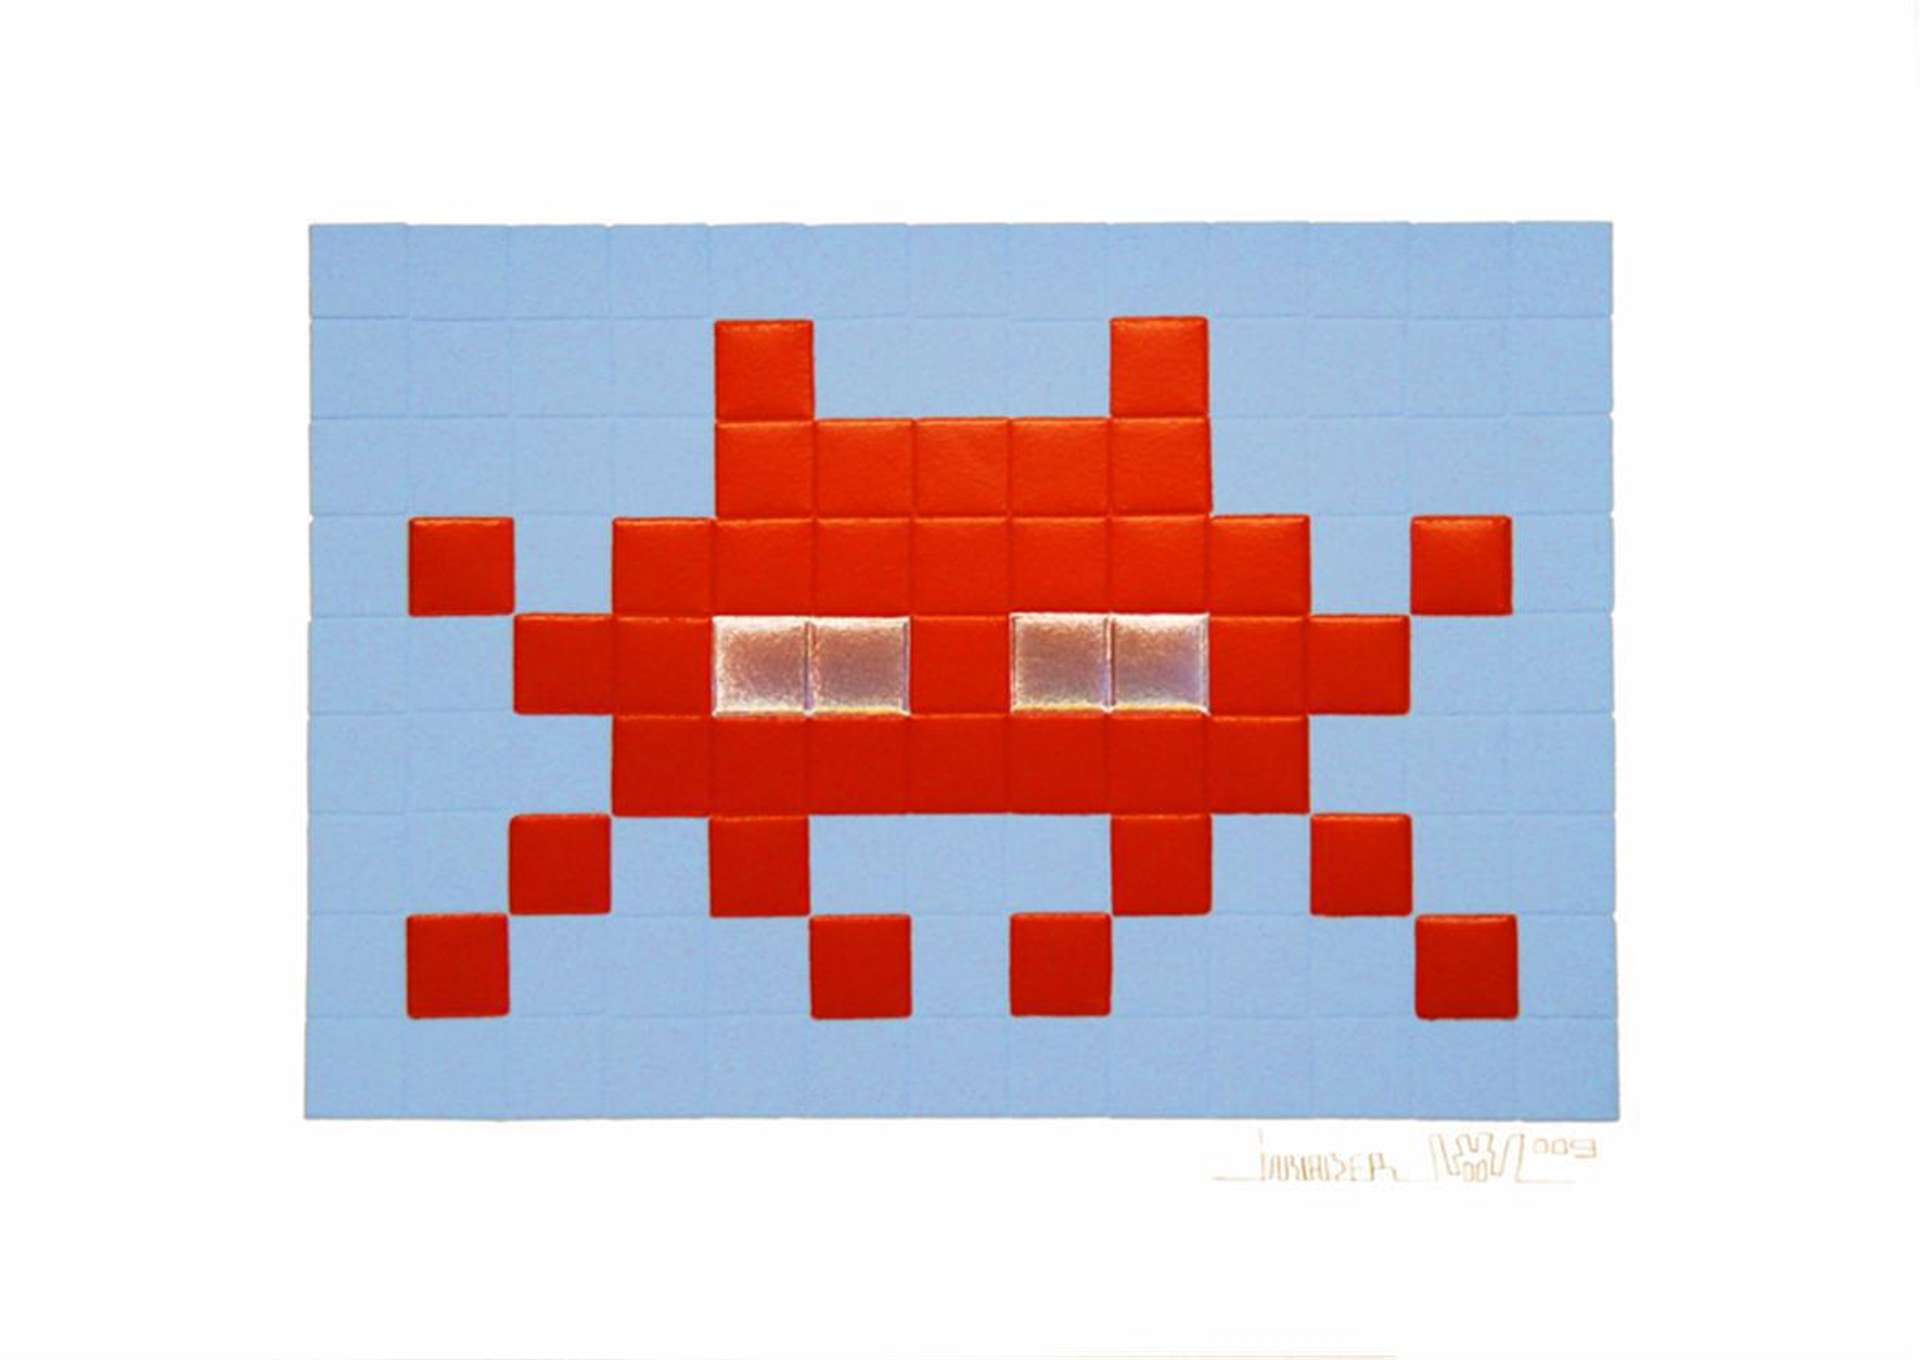 Invasion (red) by Invader